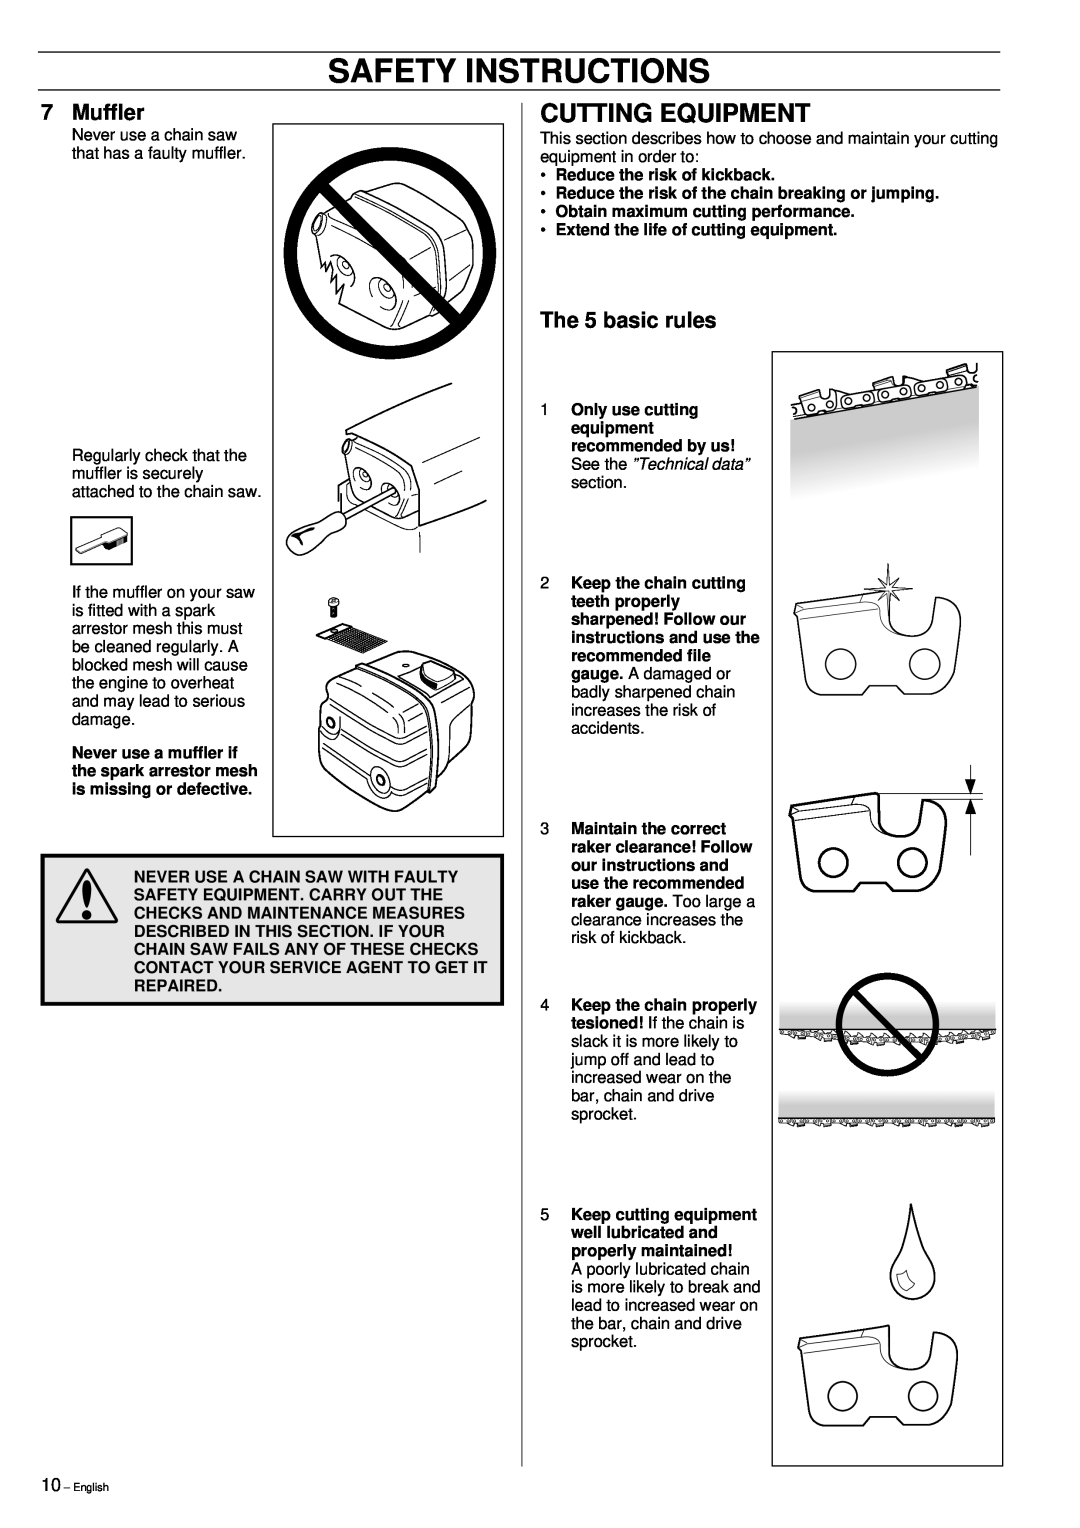 Jonsered 2149 manual Cutting Equipment, The 5 basic rules, Safety Instructions, Muffler 